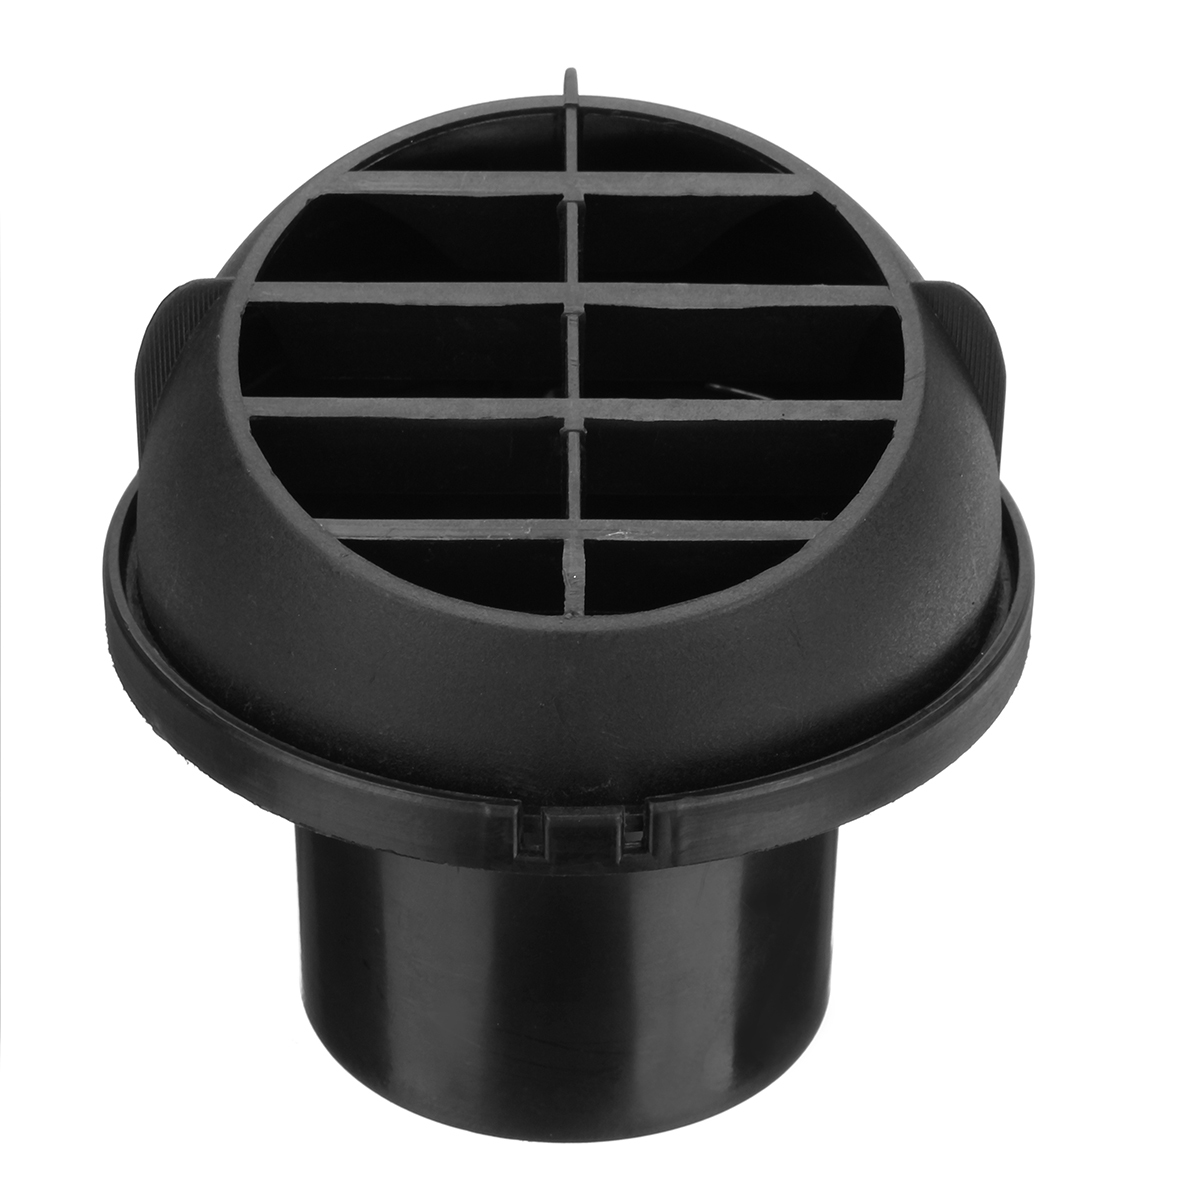 60mm Warm Heater Parking Heater Car Heater Air Outlet Directional Rotatable 2